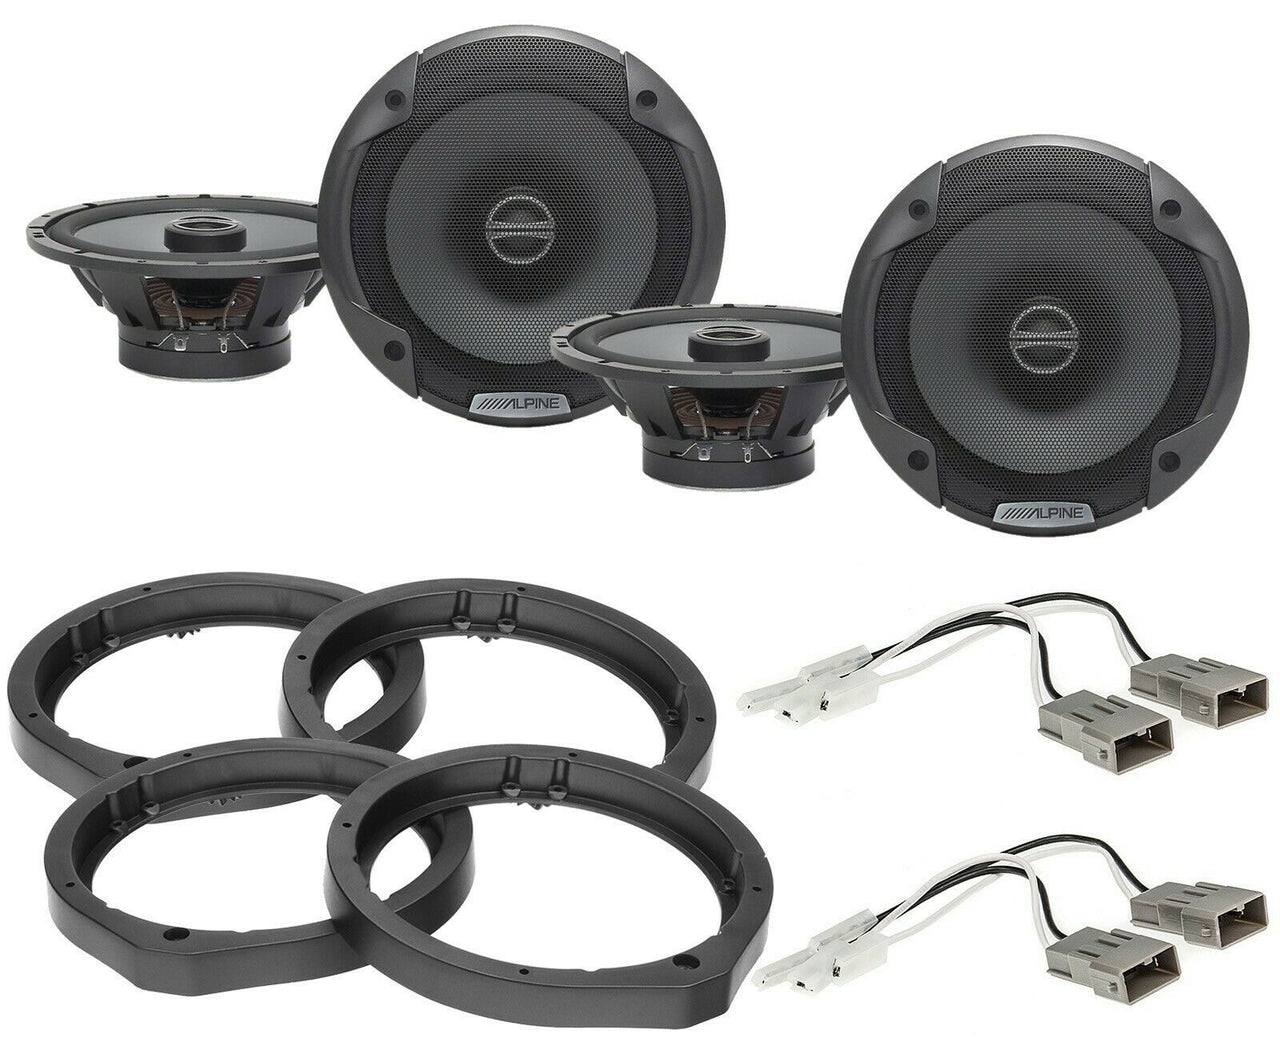 2 Alpine SPE-6000 6.5" Speaker Package With Speaker Adapter and Harness For Select Honda and Acura Vehicles